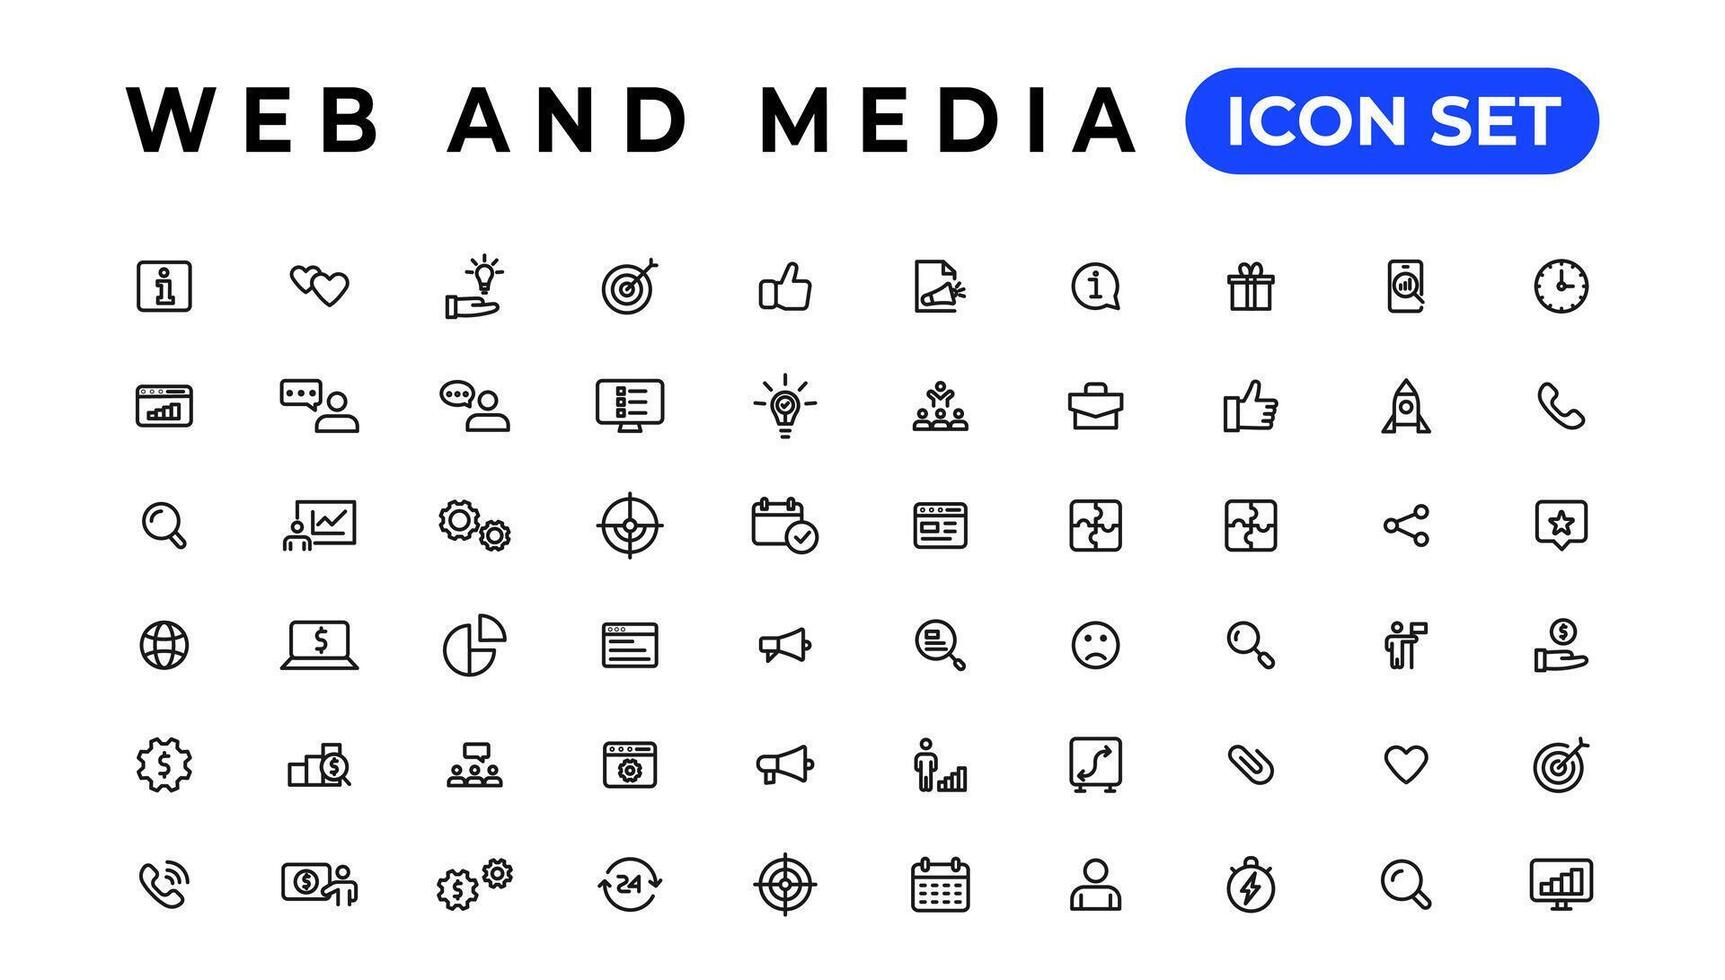 Audio Video Icons Pack. Thin line icons set. Flat icon collection set. Simple vector icons